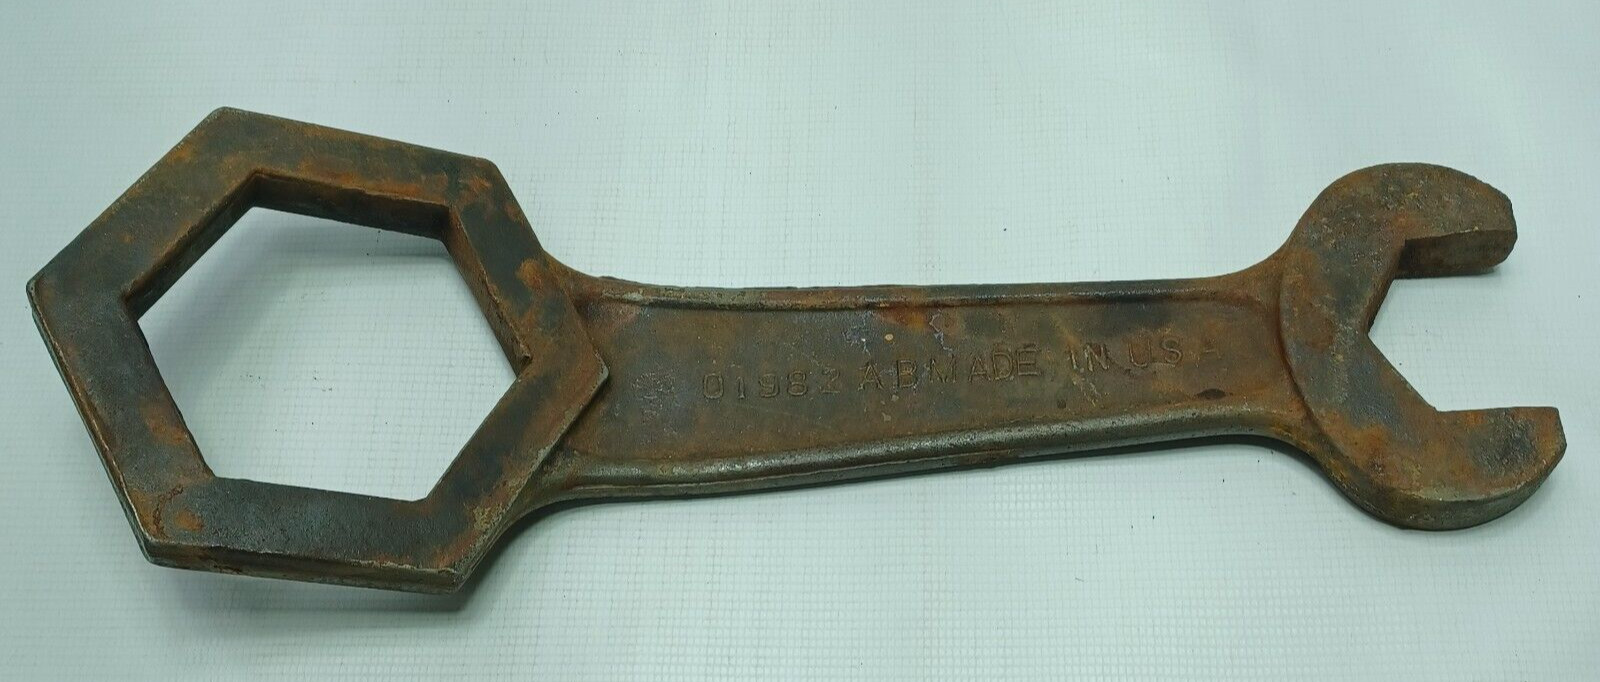 Antique J. I. Case wrench Threshing Machine Co. Tractor Hubcap 01982AB